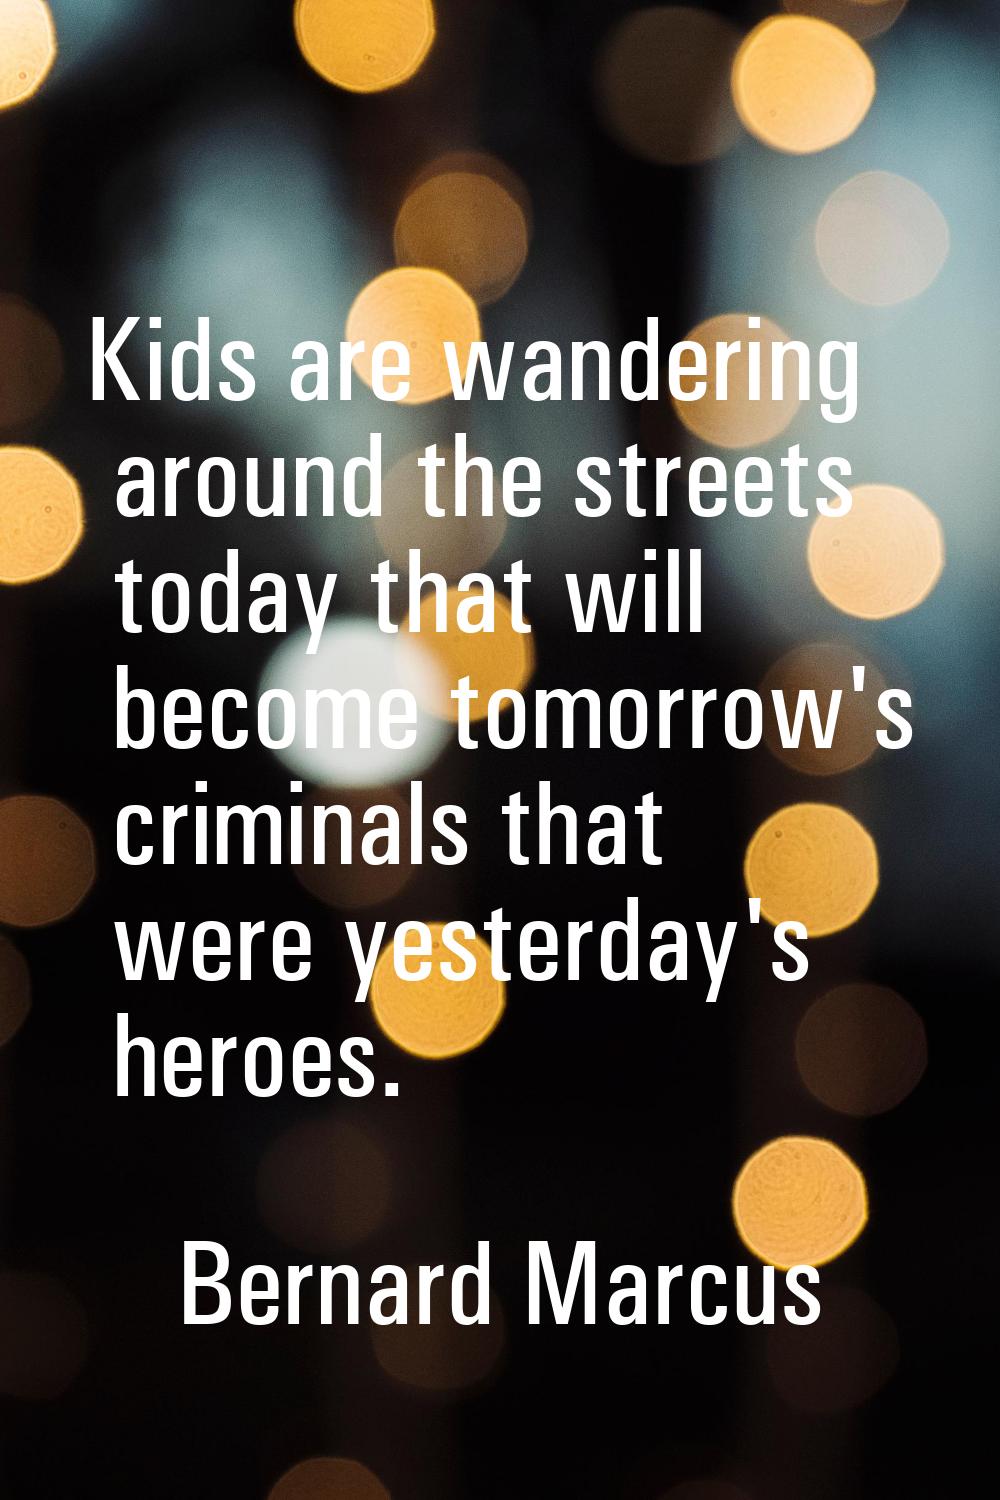 Kids are wandering around the streets today that will become tomorrow's criminals that were yesterd